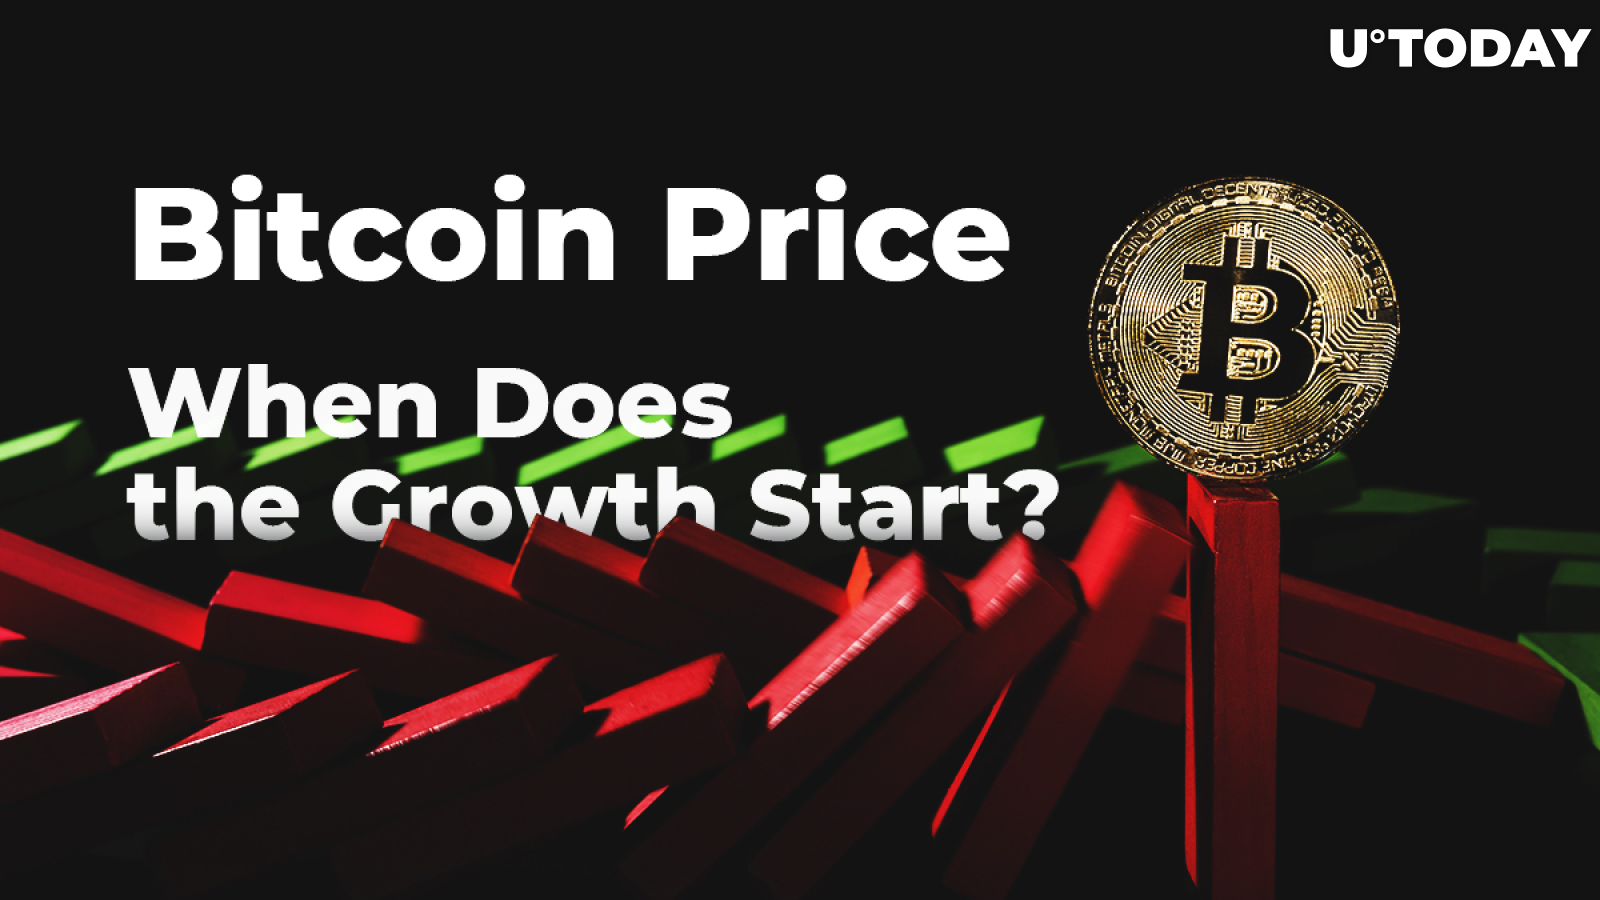 Bitcoin Price Prediction — Bitcoin Broke the Support at $8,000. When Does the Growth Start?